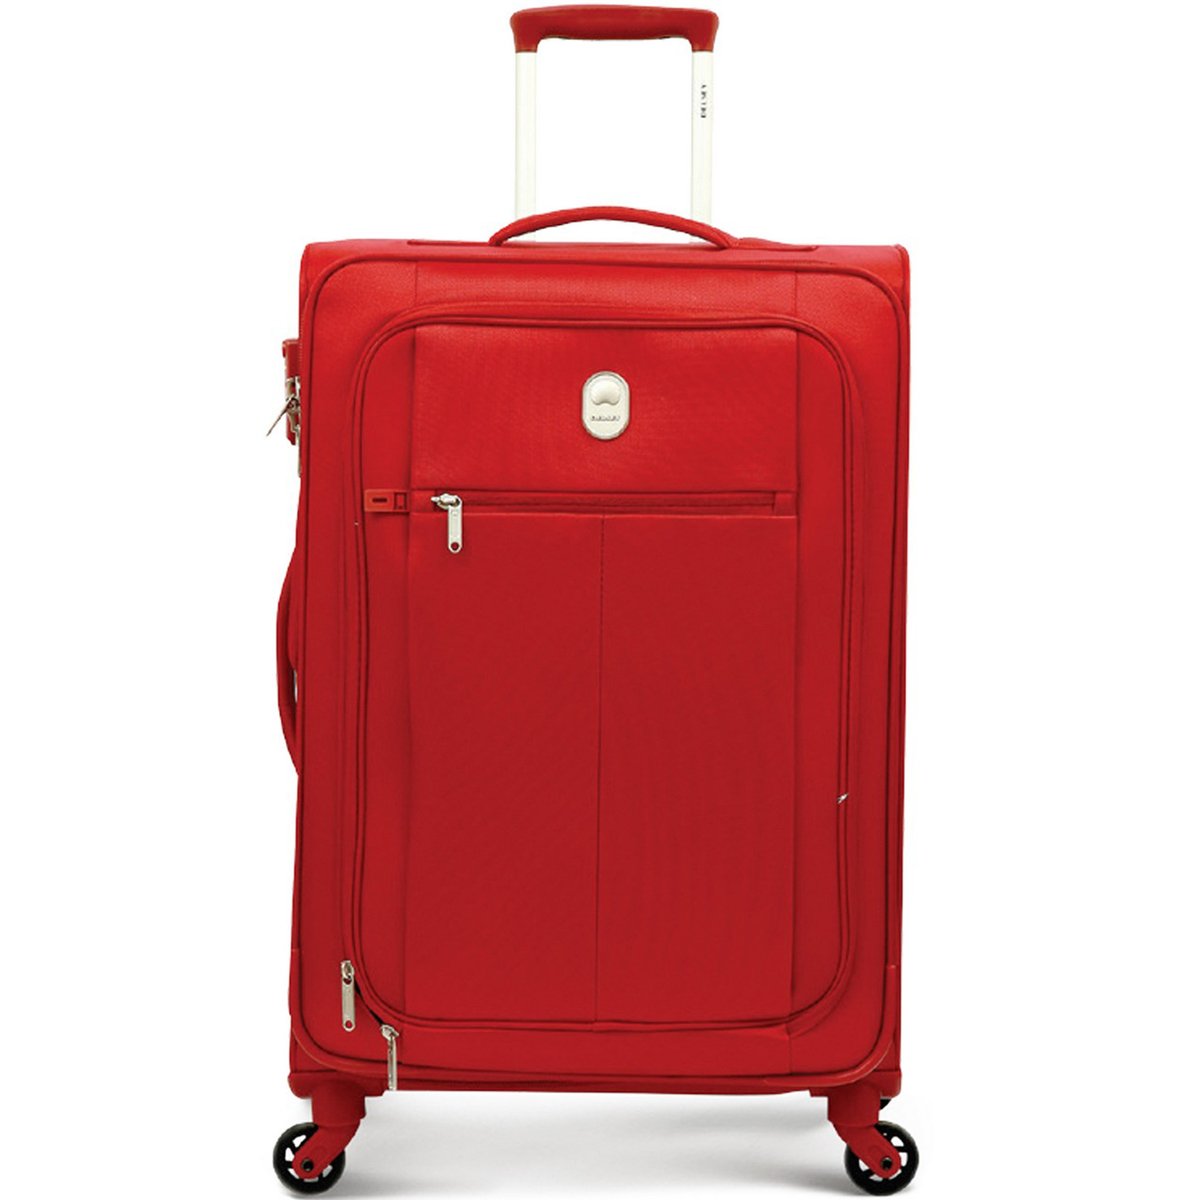 Delsey PinUp 5 4Wheel Soft Trolley 3420811 55cm Red